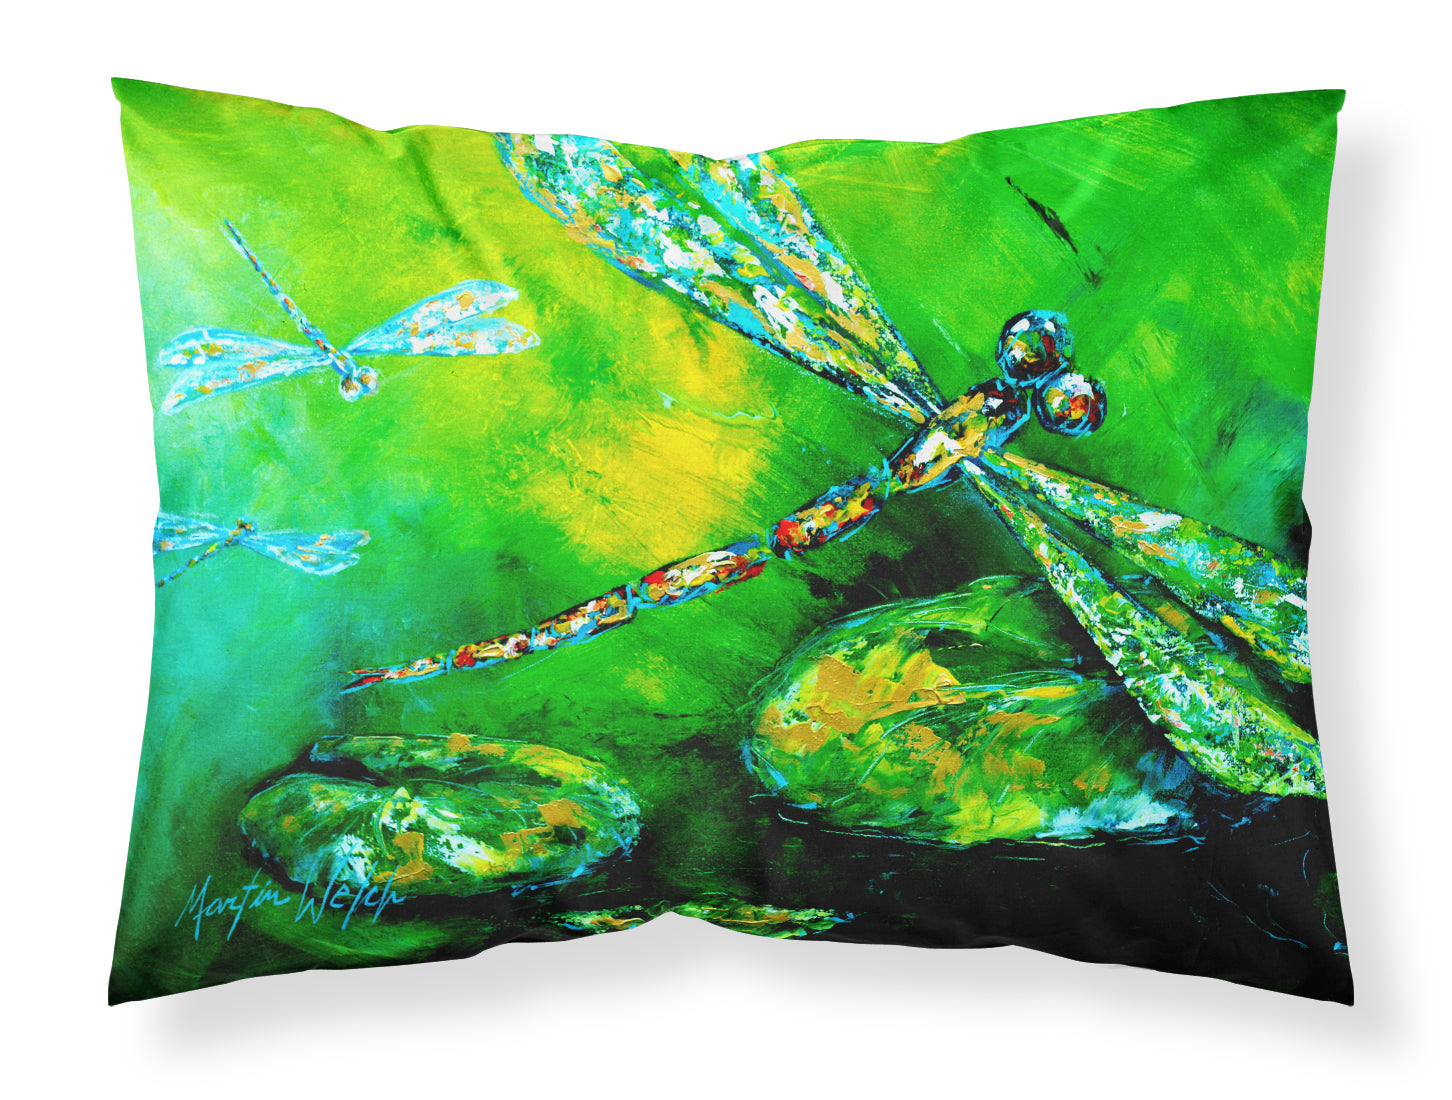 Buy this Dragonfly Summer Flies Fabric Standard Pillowcase